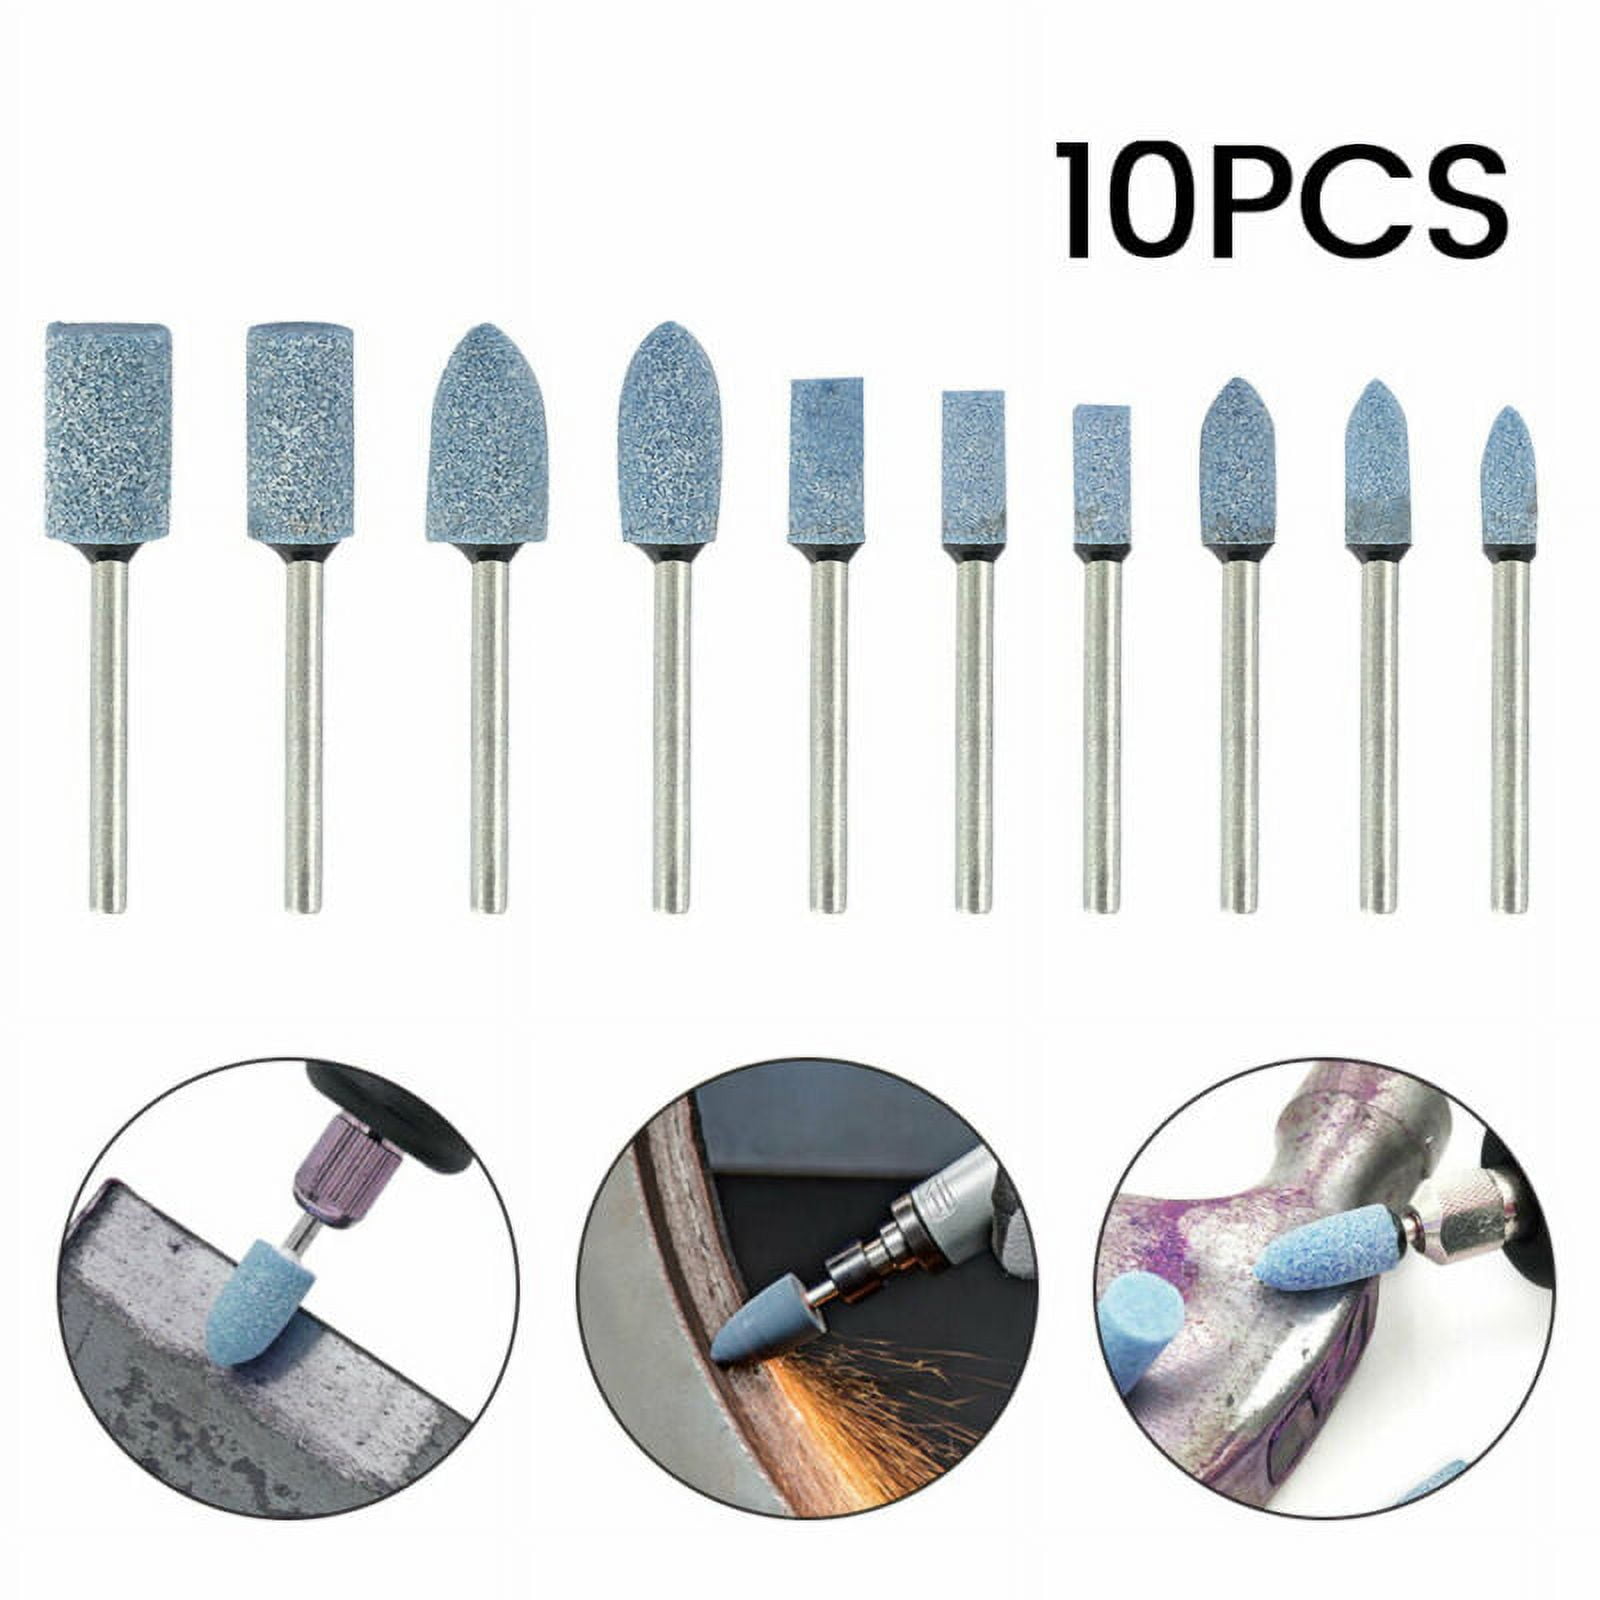 Dremel 709-02 110 Pcs All-Purpose Rotary Tool Accessories Kit Includes a  Carving Bit Sanding Drums Grinding Stones Cutting Discs - AliExpress